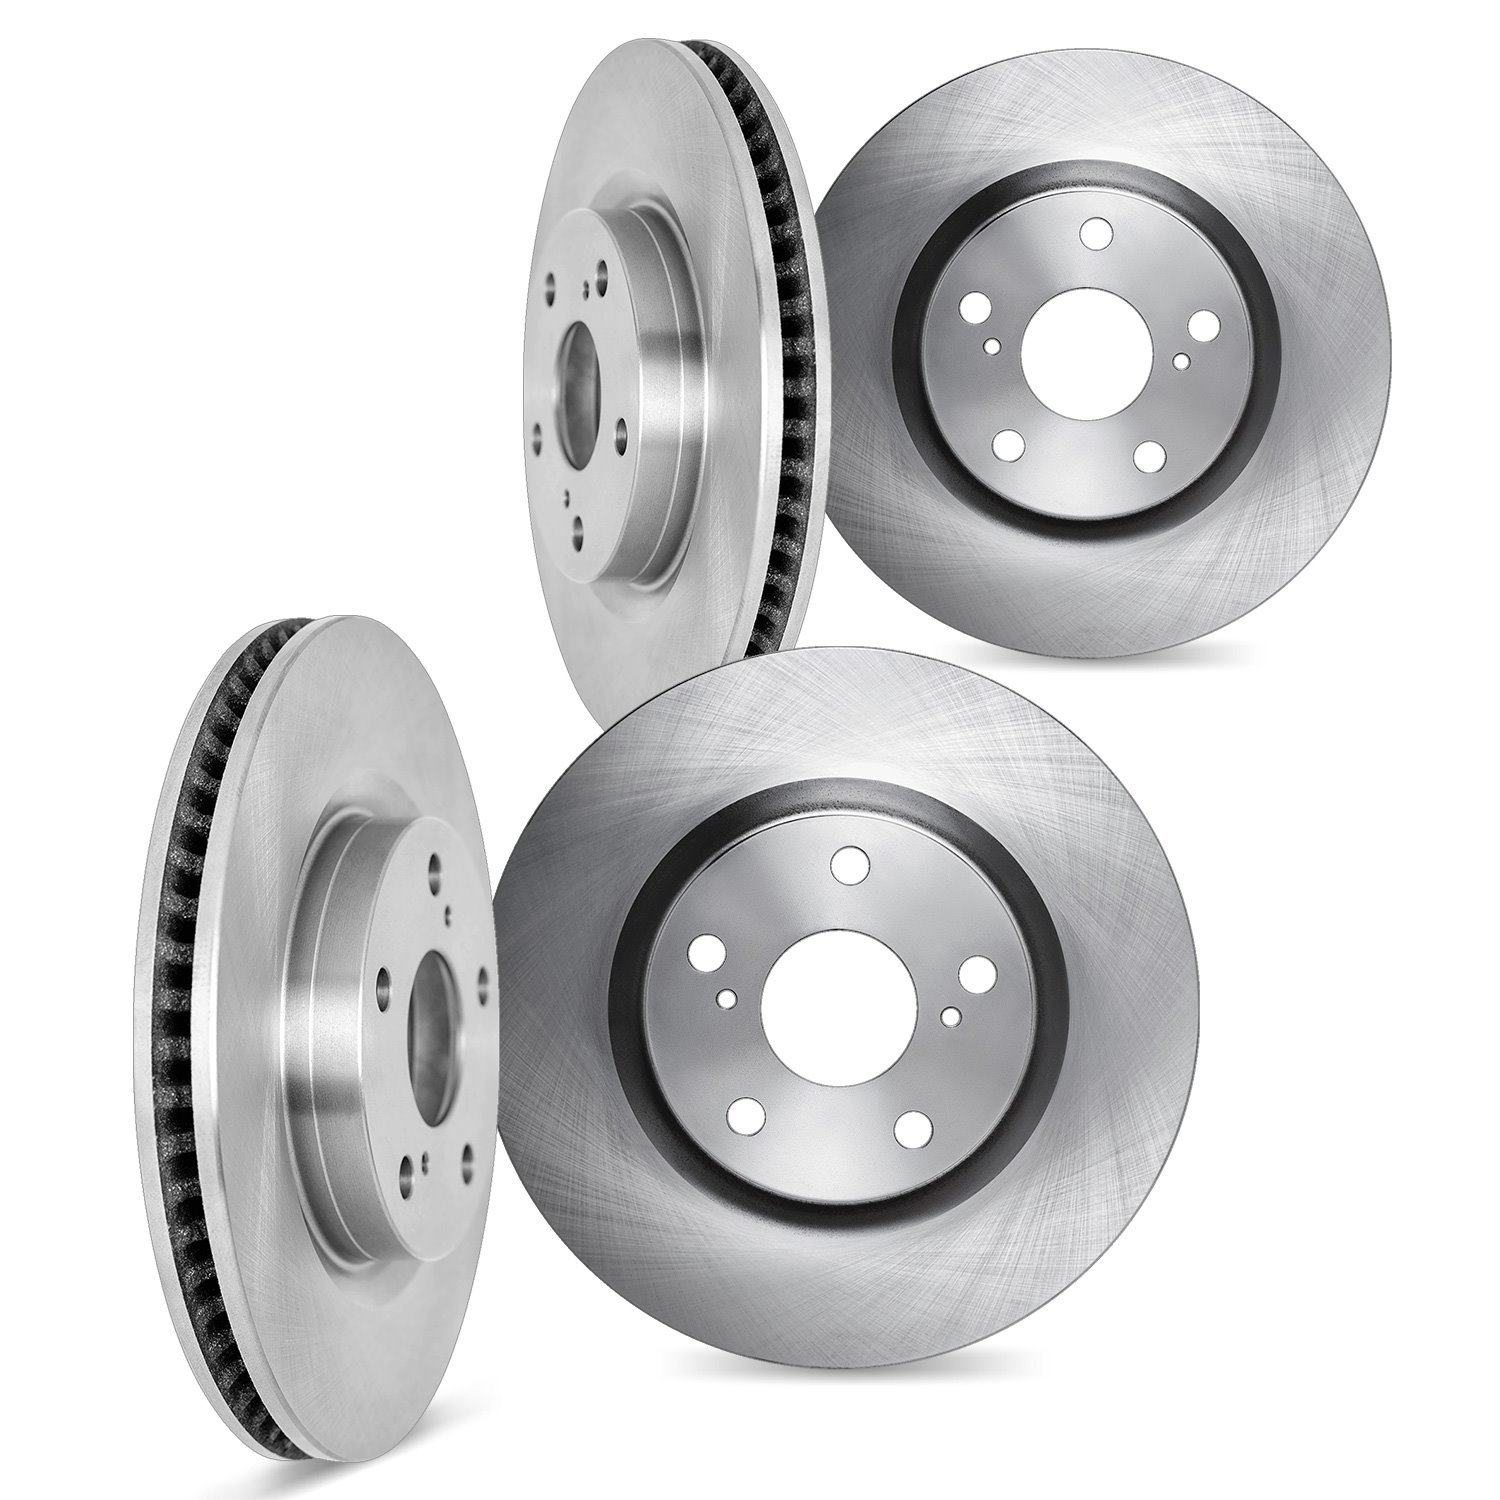 6004-39052 Brake Rotors, Fits Select Mopar, Position: Front and Rear